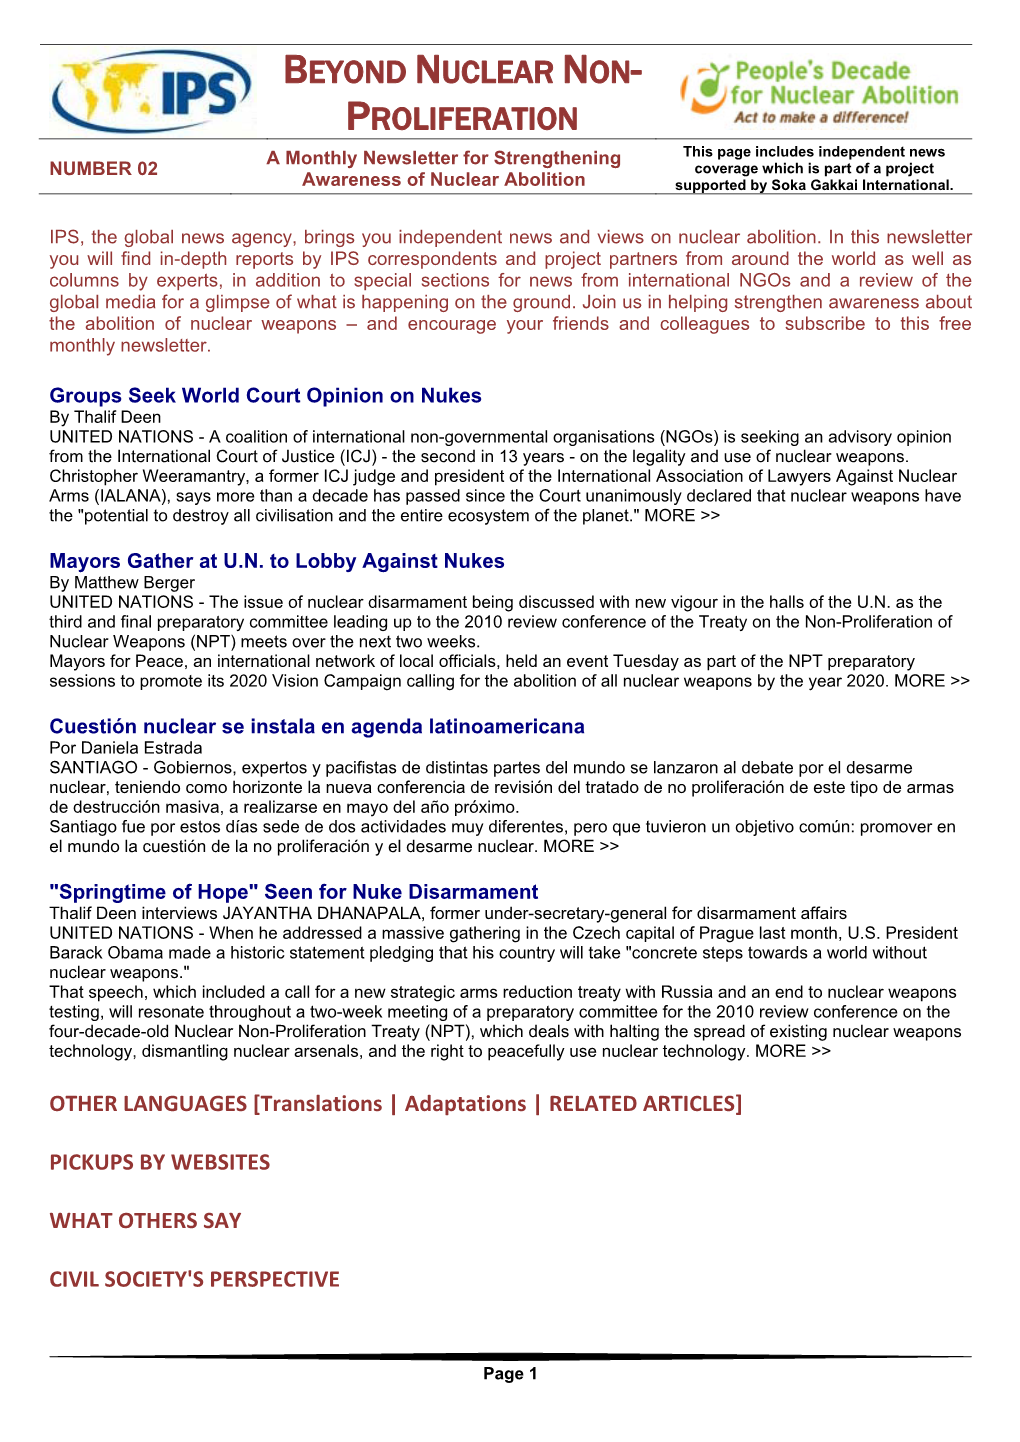 BEYOND NUCLEAR NON-PROLIFERATION Number 02